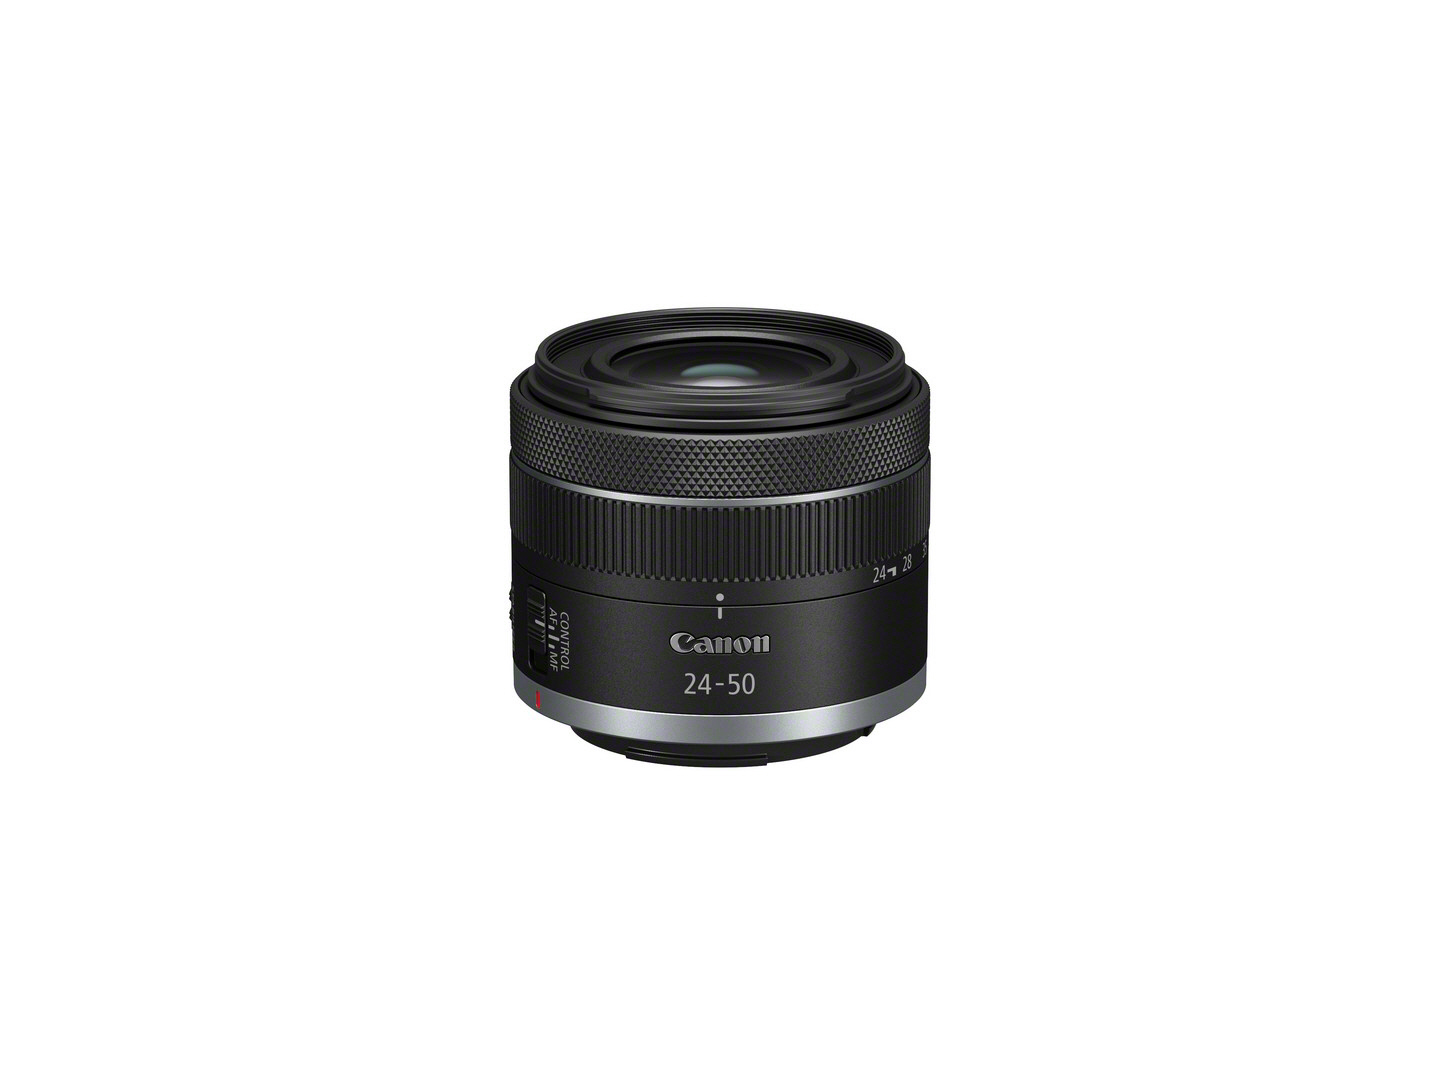 Canon RF 24-50mm F4.5-6.3 IS STM MILC Standard zoomlinse Sort